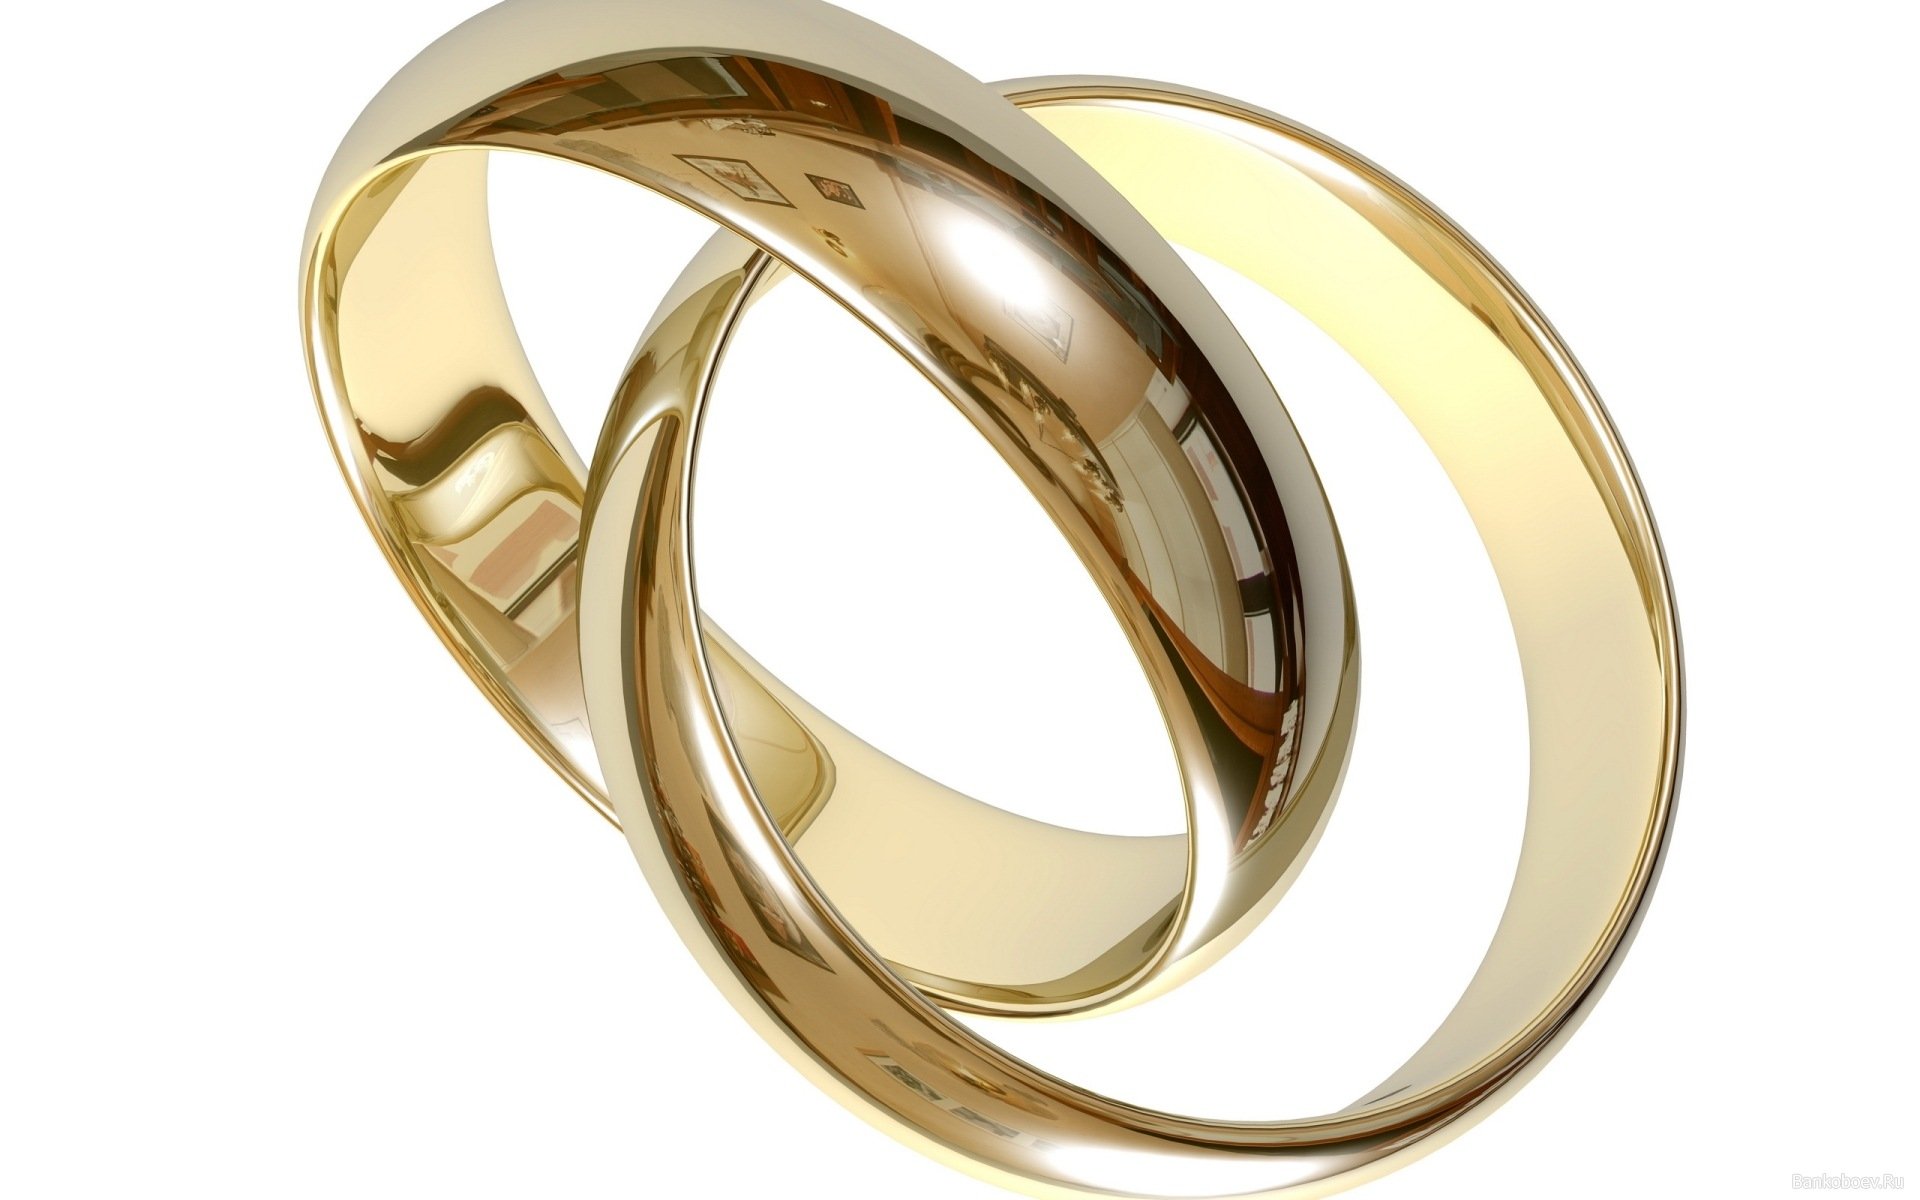 Wedding ring hd wallpapers free | Latest HD Wallpapers